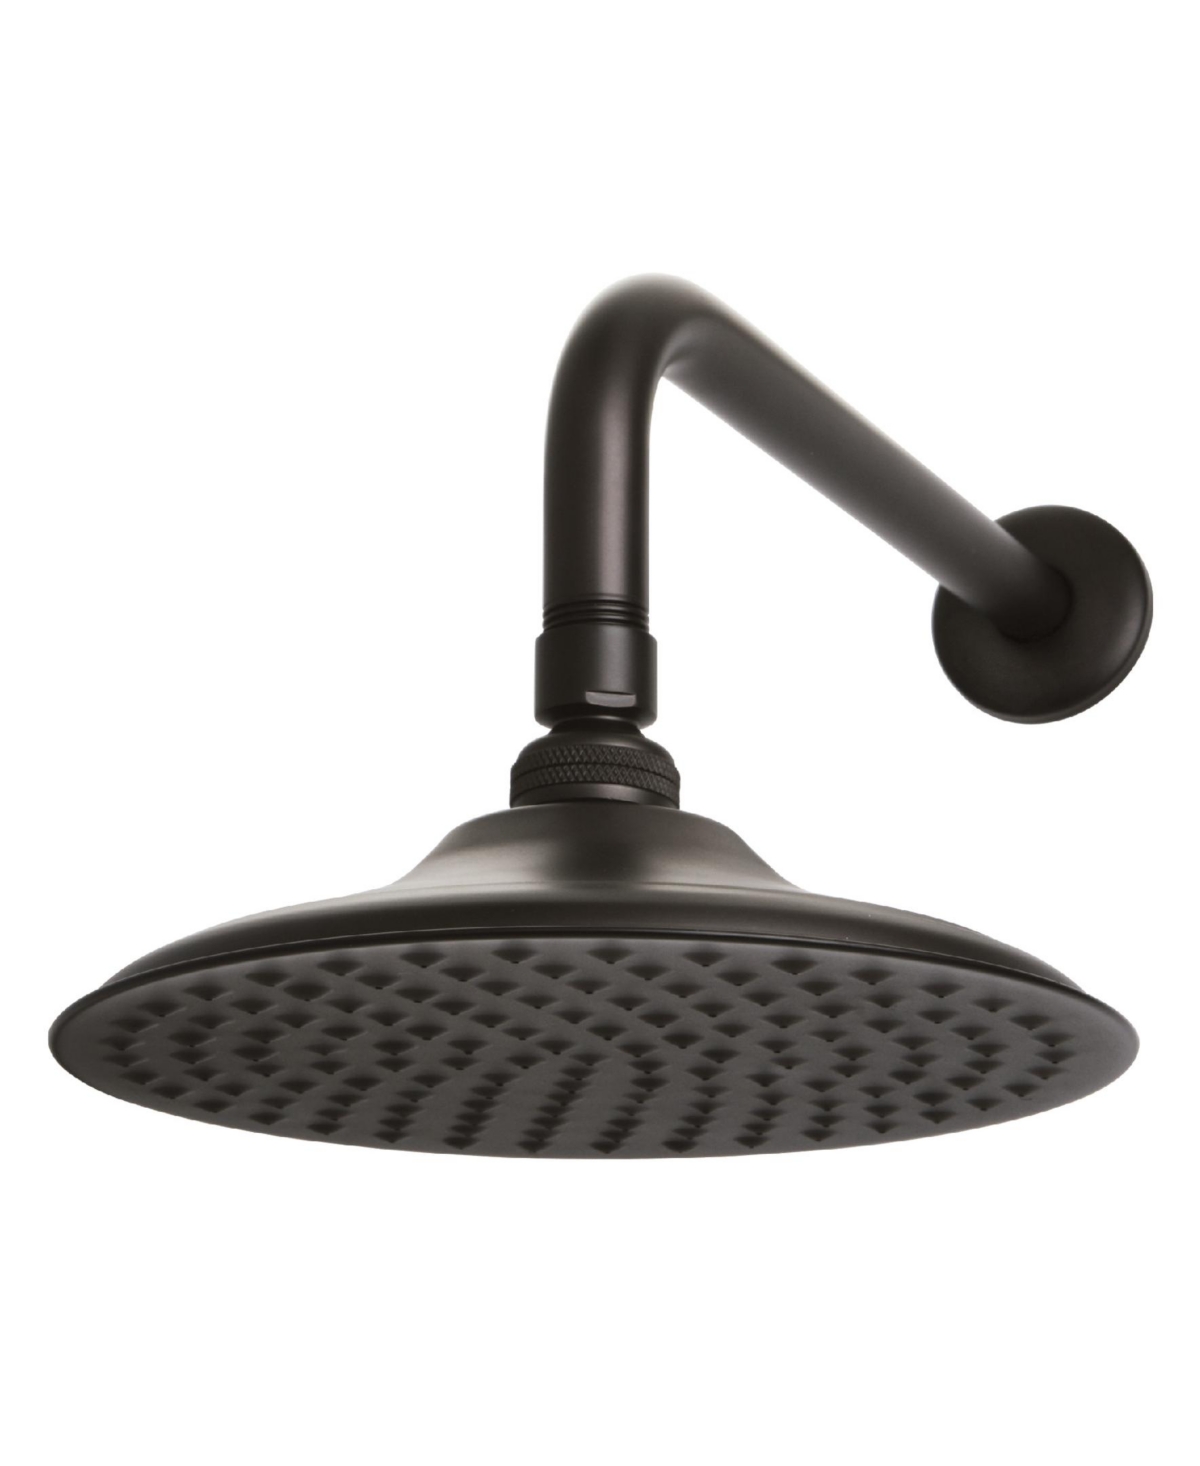 Kingston Brass Victorian 7-3/4-Inch Od Brass Shower Head with 12-Inch Shower Arm in Oil Rubbed Bronze Bedding